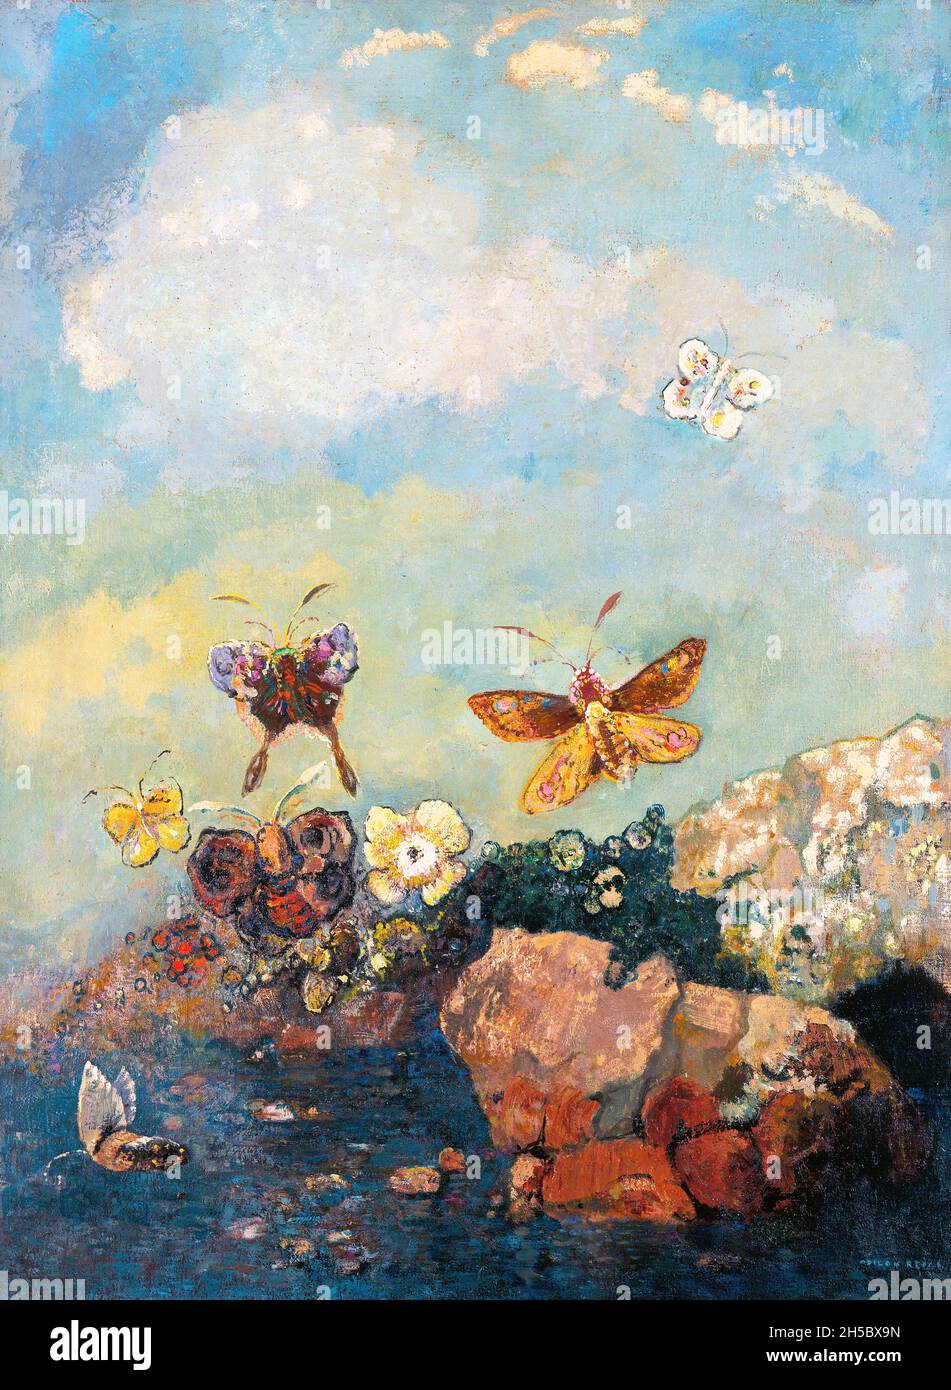 Butterflies by Odilon Redon (1840-1916), oil on canvas, c. 1910 Stock Photo